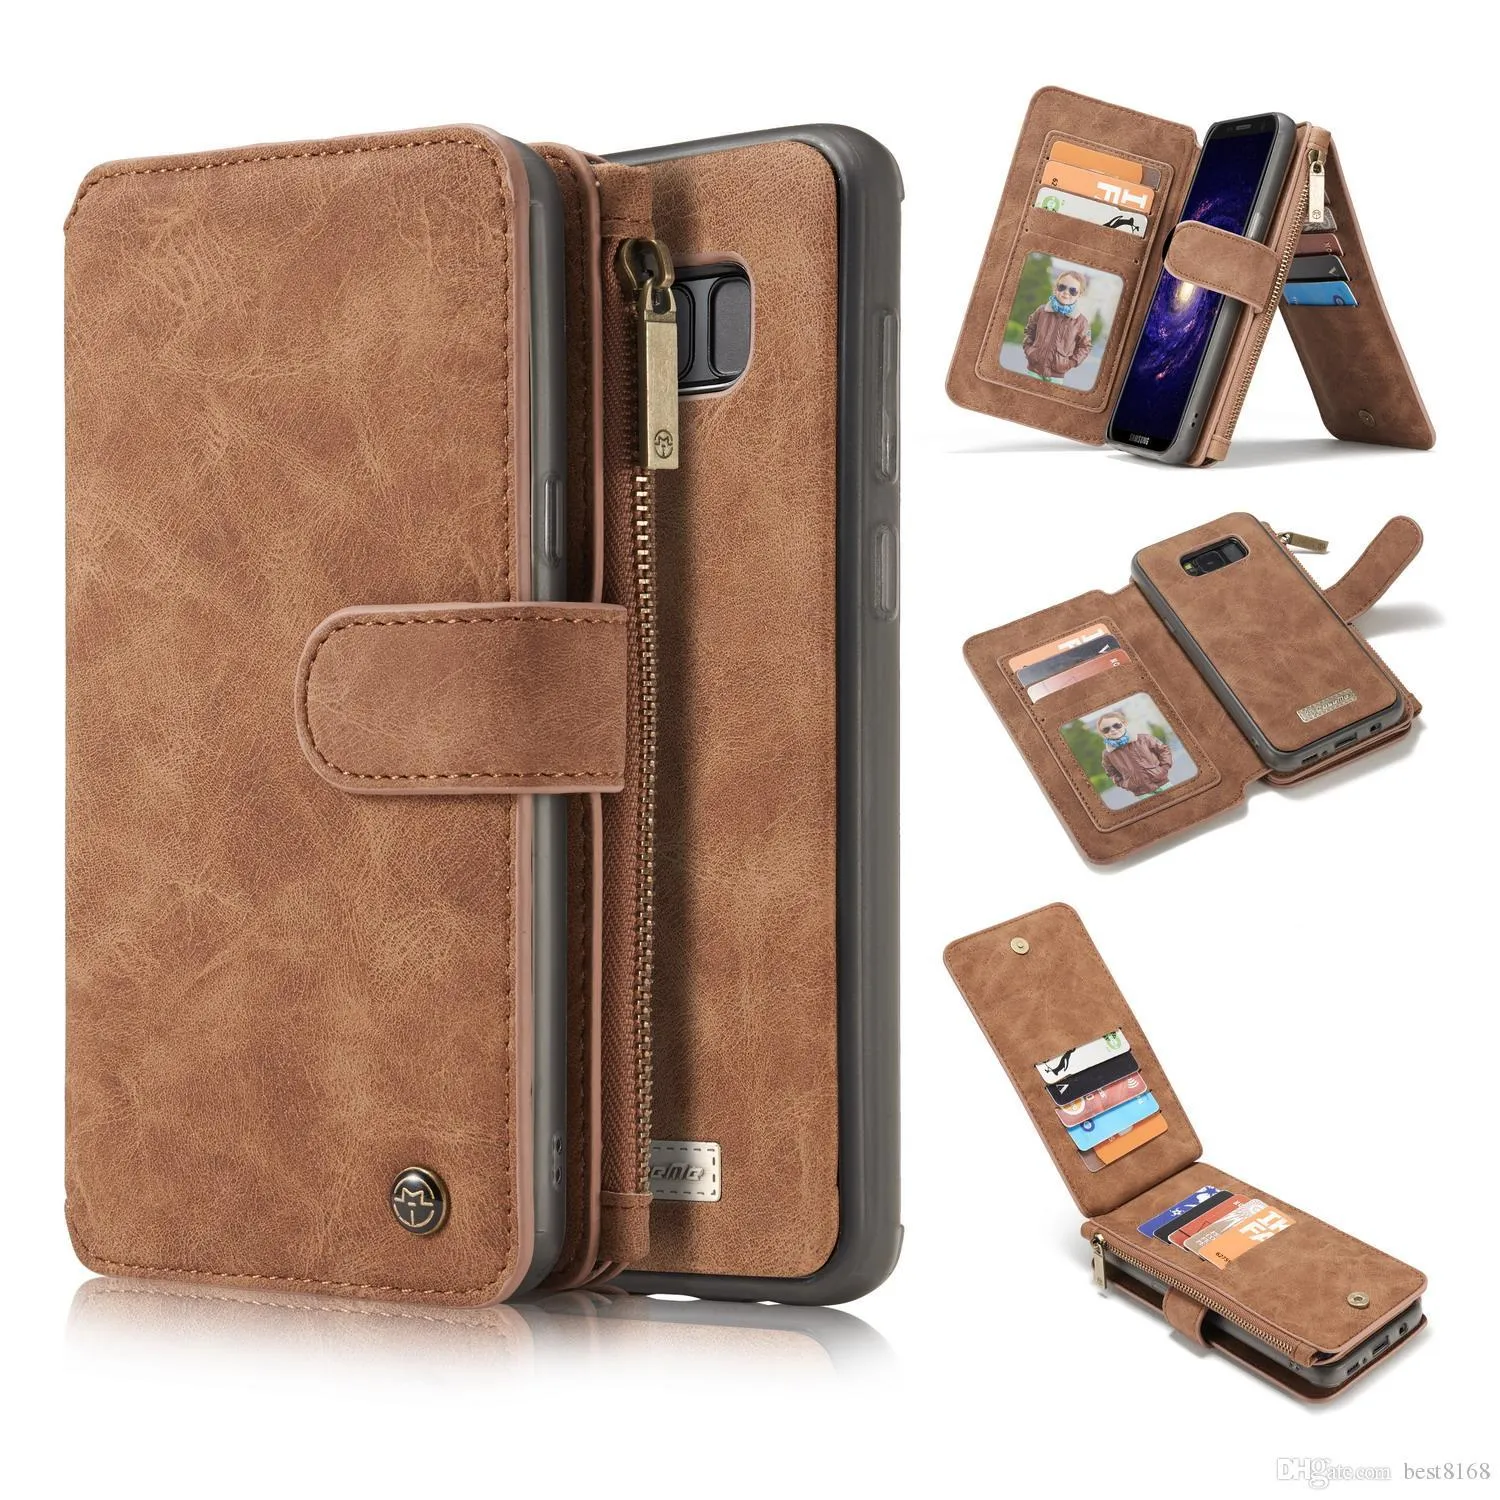 CaseMe Multifunction Cases For Iphone 13 Pro 12 11 XS MAX XR X 8 7 Galaxy S21 FE Note 20 S20 A52 A72 14 Cards Slot Wallet Leather Magnetic Removable Detachable Flip Cover